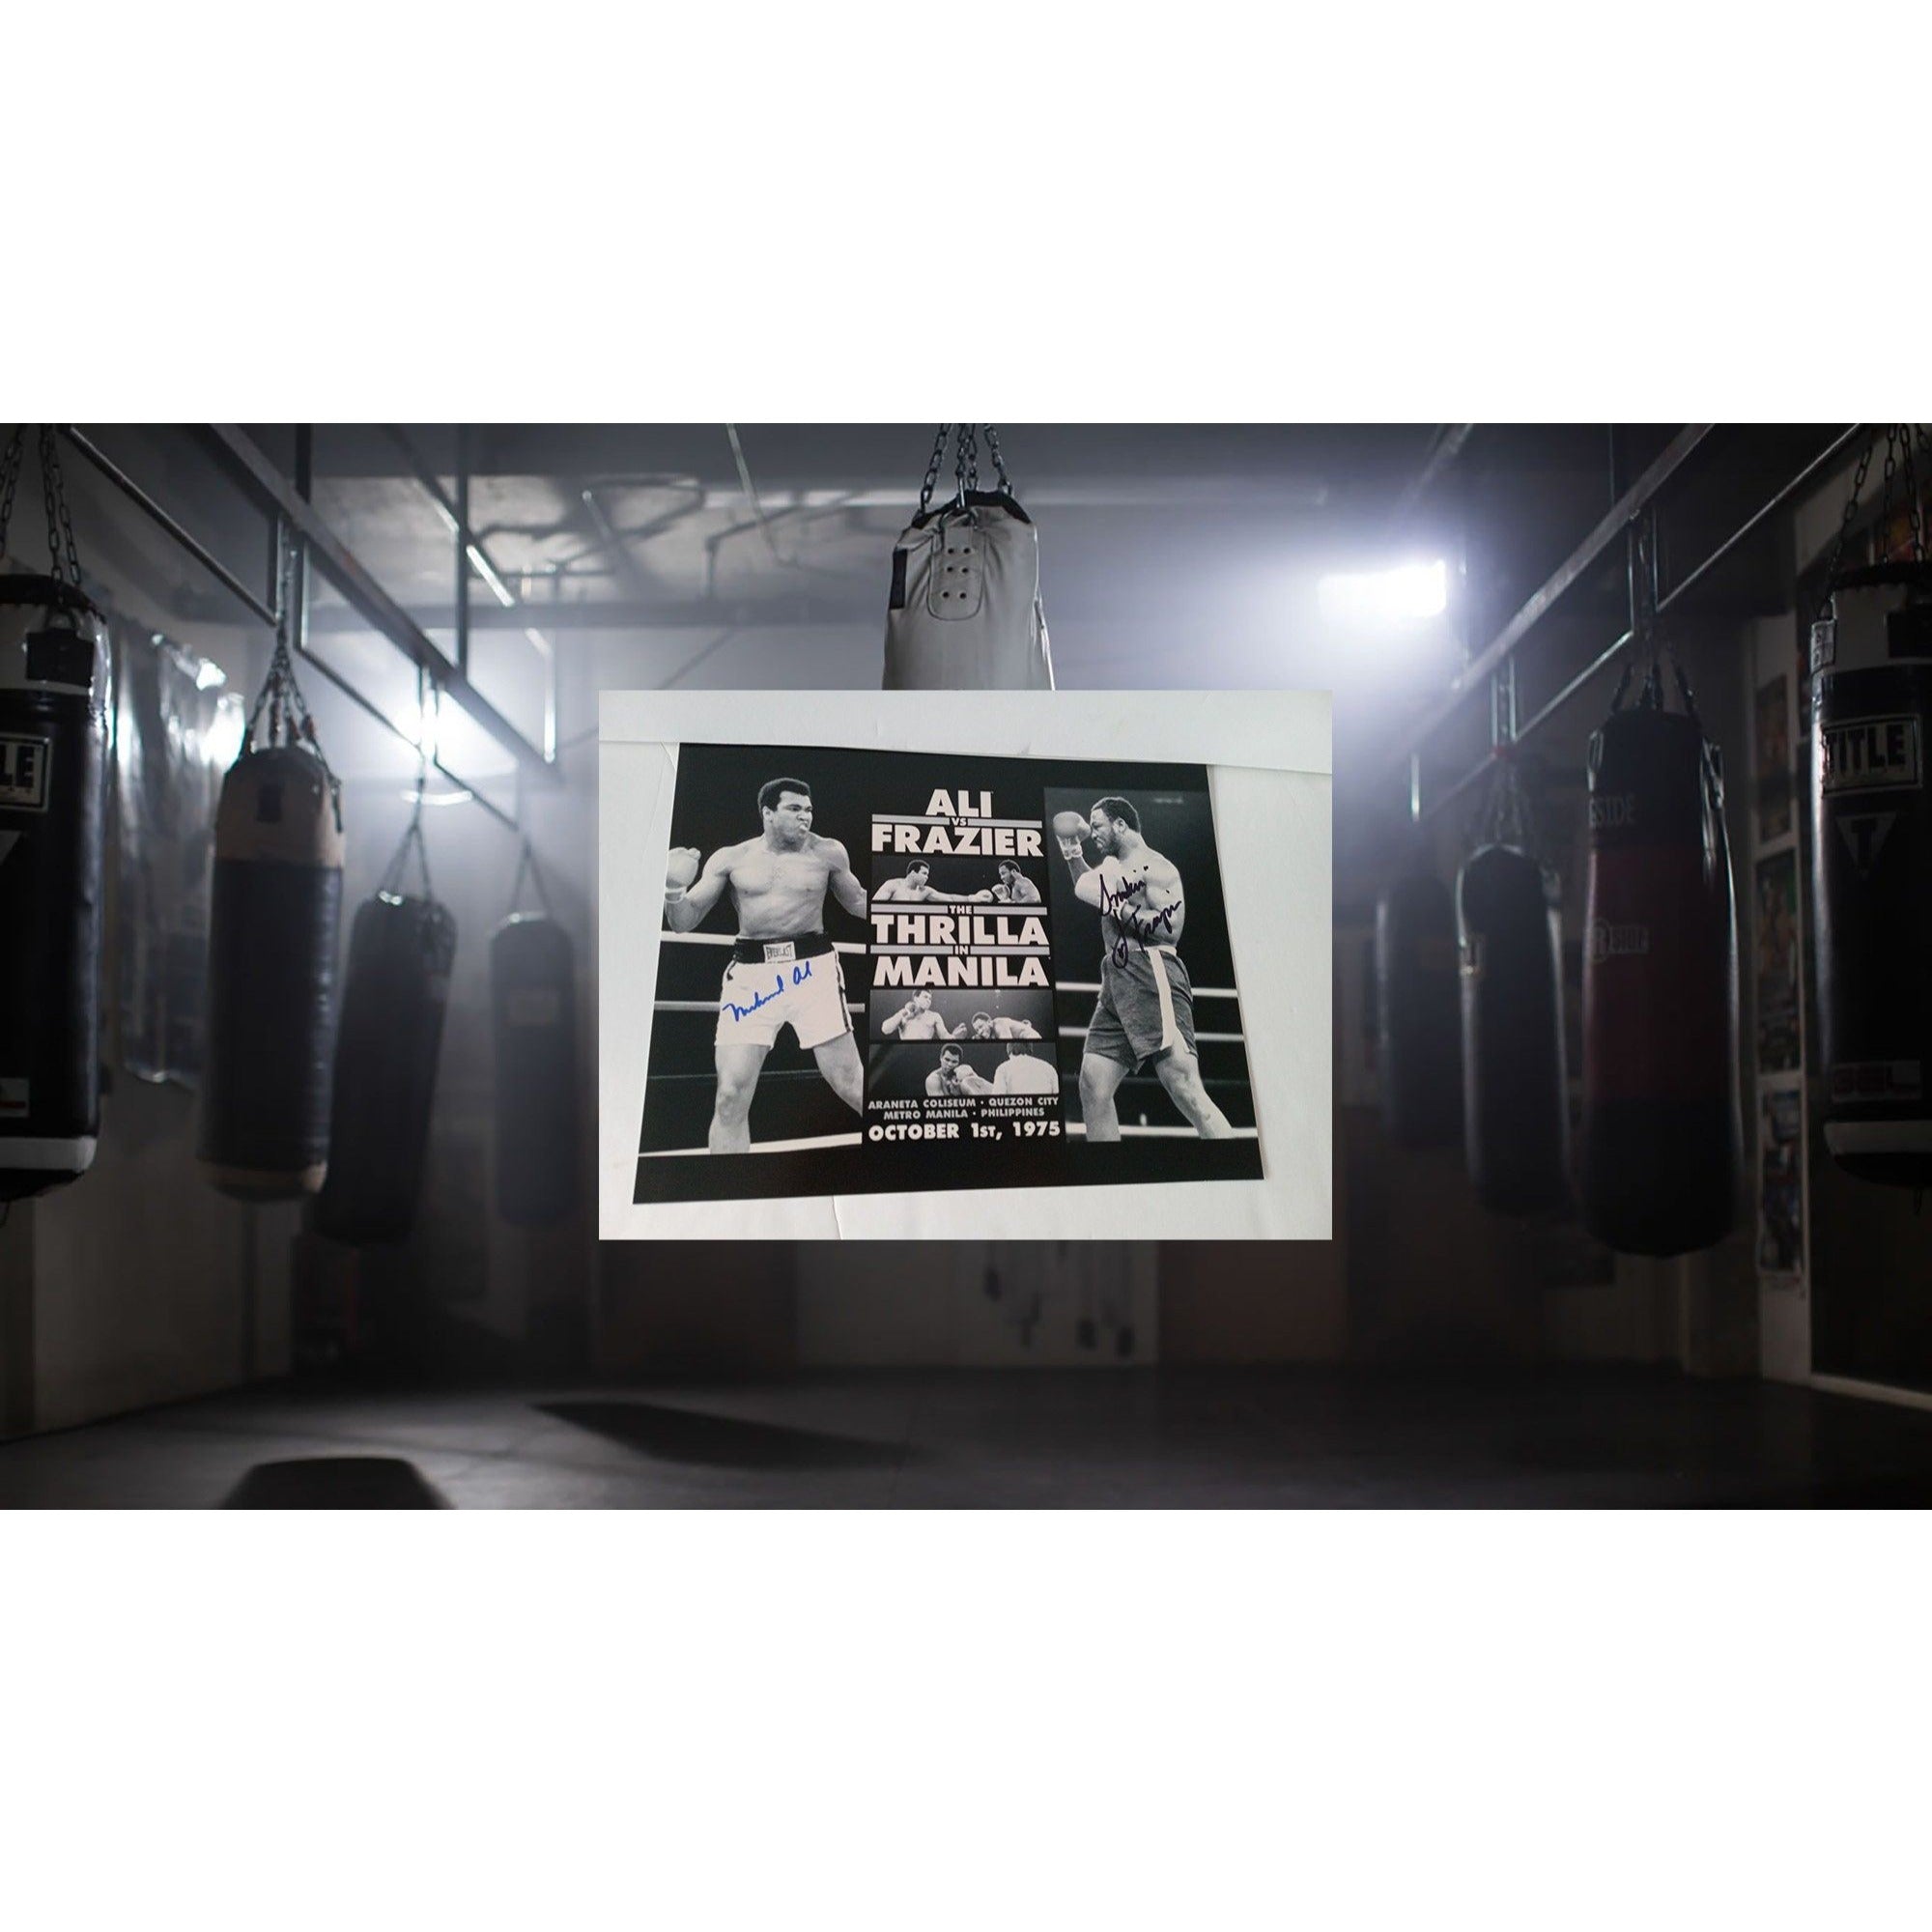 Muhammad Ali and Joe Frazier 11 by 14 photo signed with proof